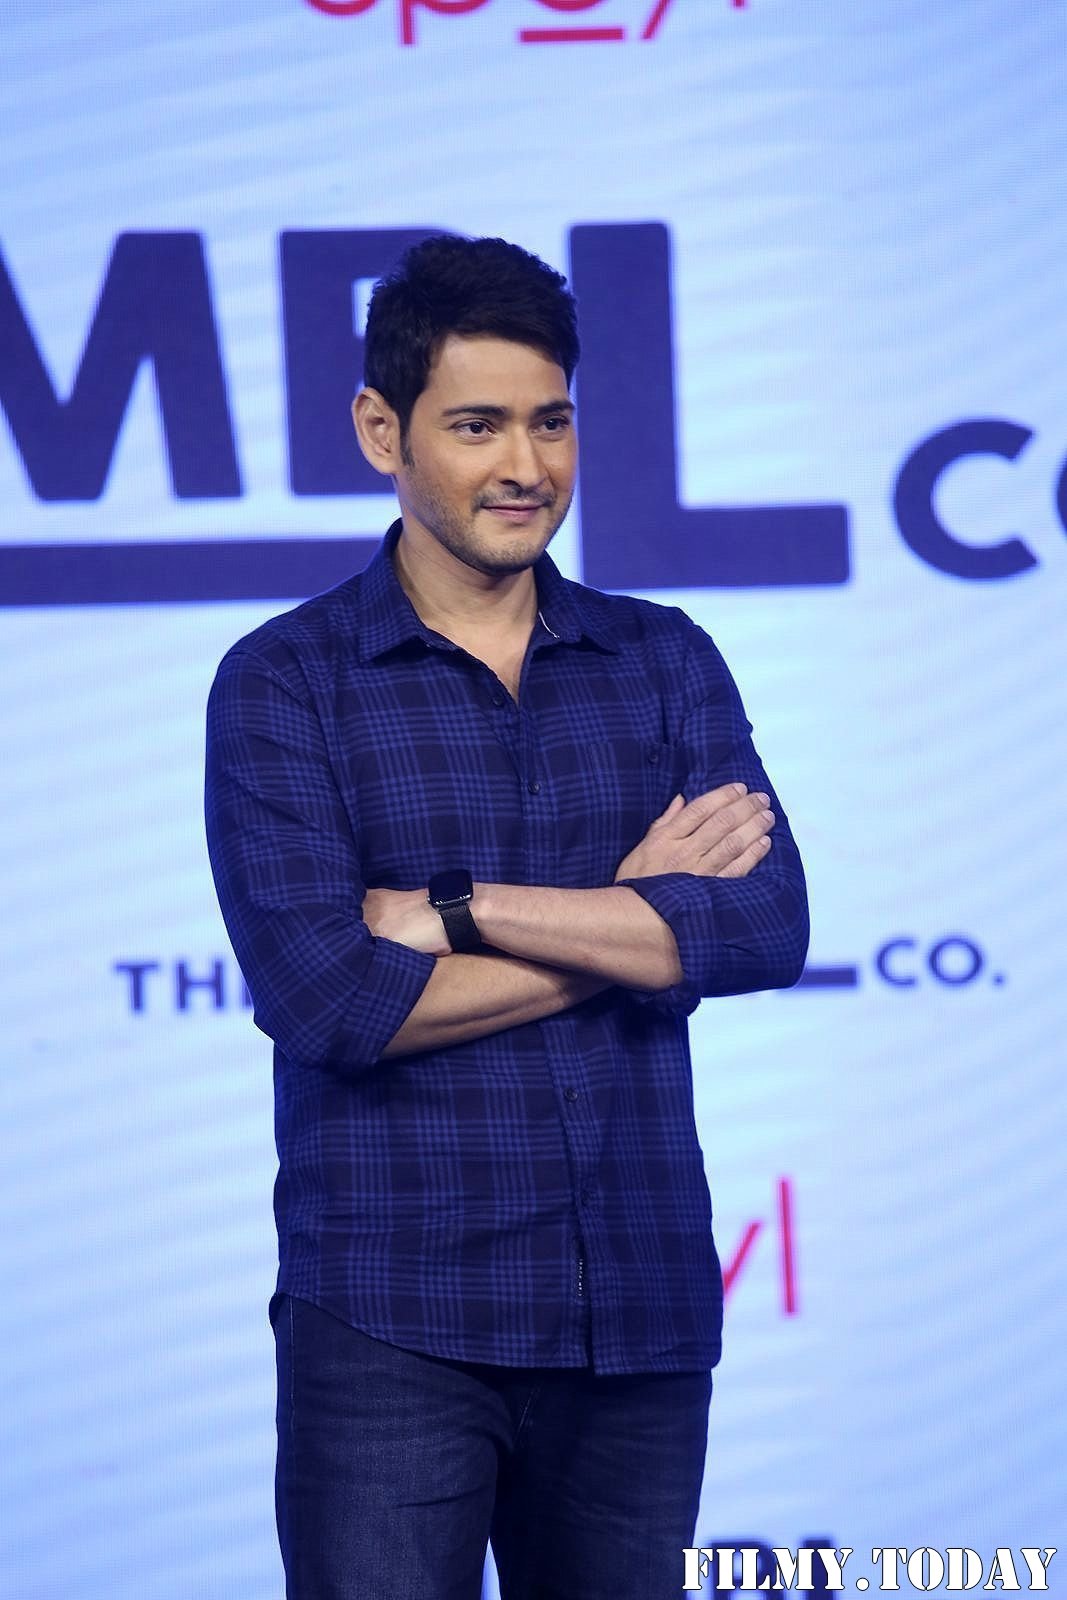 Mahesh Babu - The Humbl Co Clothing Brand Launch Photos | Picture 1673367